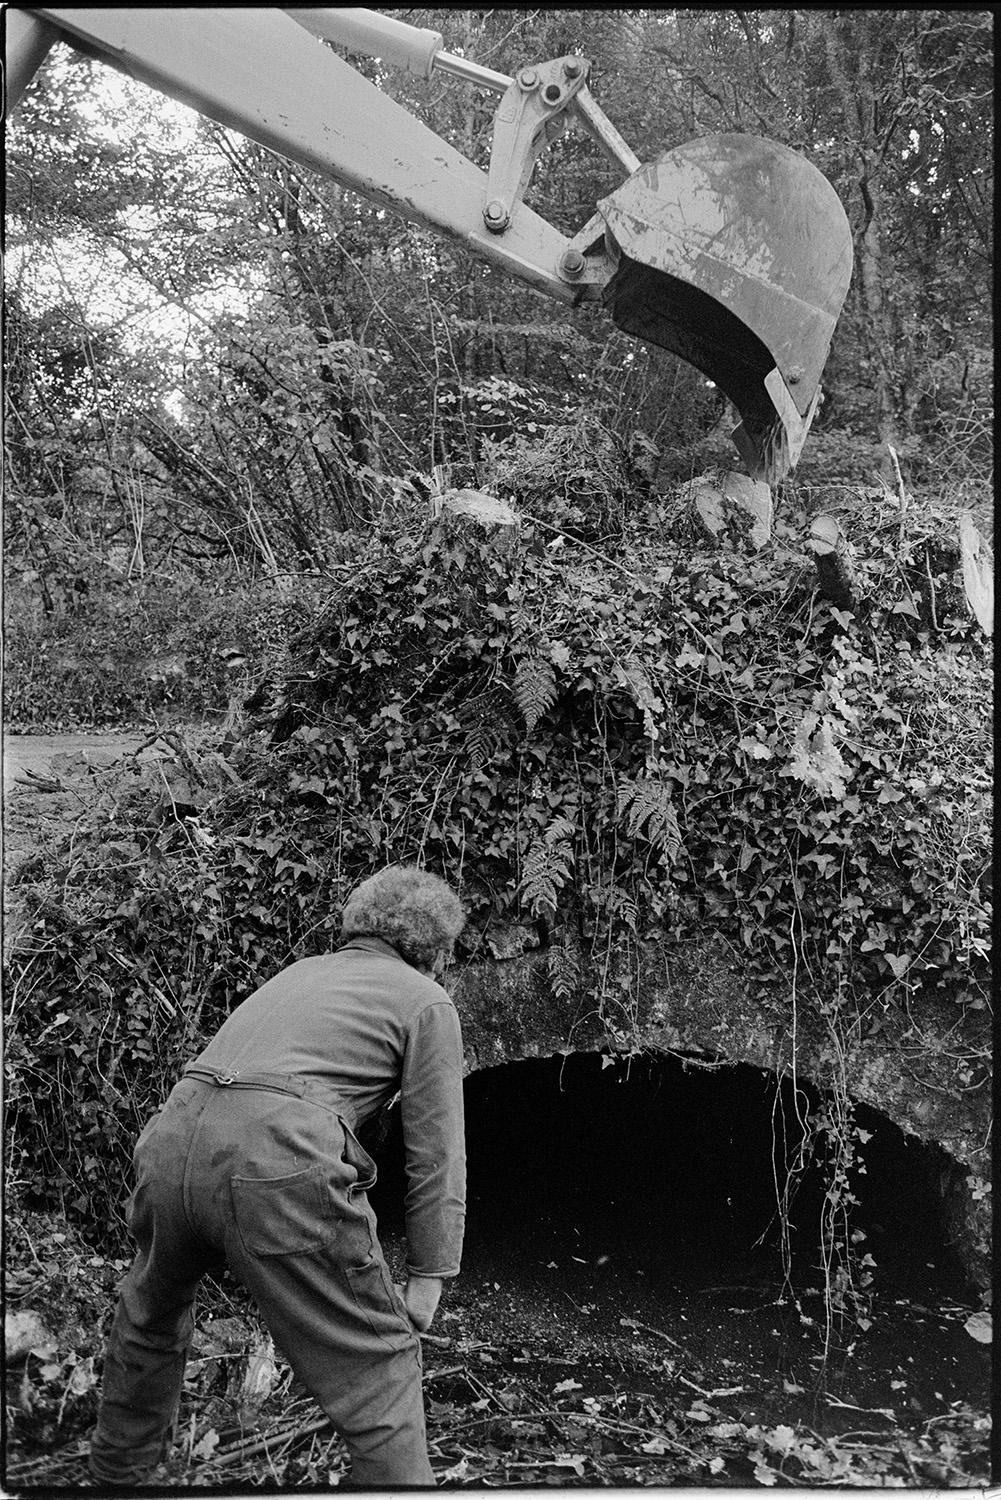 Men clearing round bridge before repairing it. 
[A man guiding a JCB digger to clear foliage from a bridge before its repaired at Addisford, Dolton.]